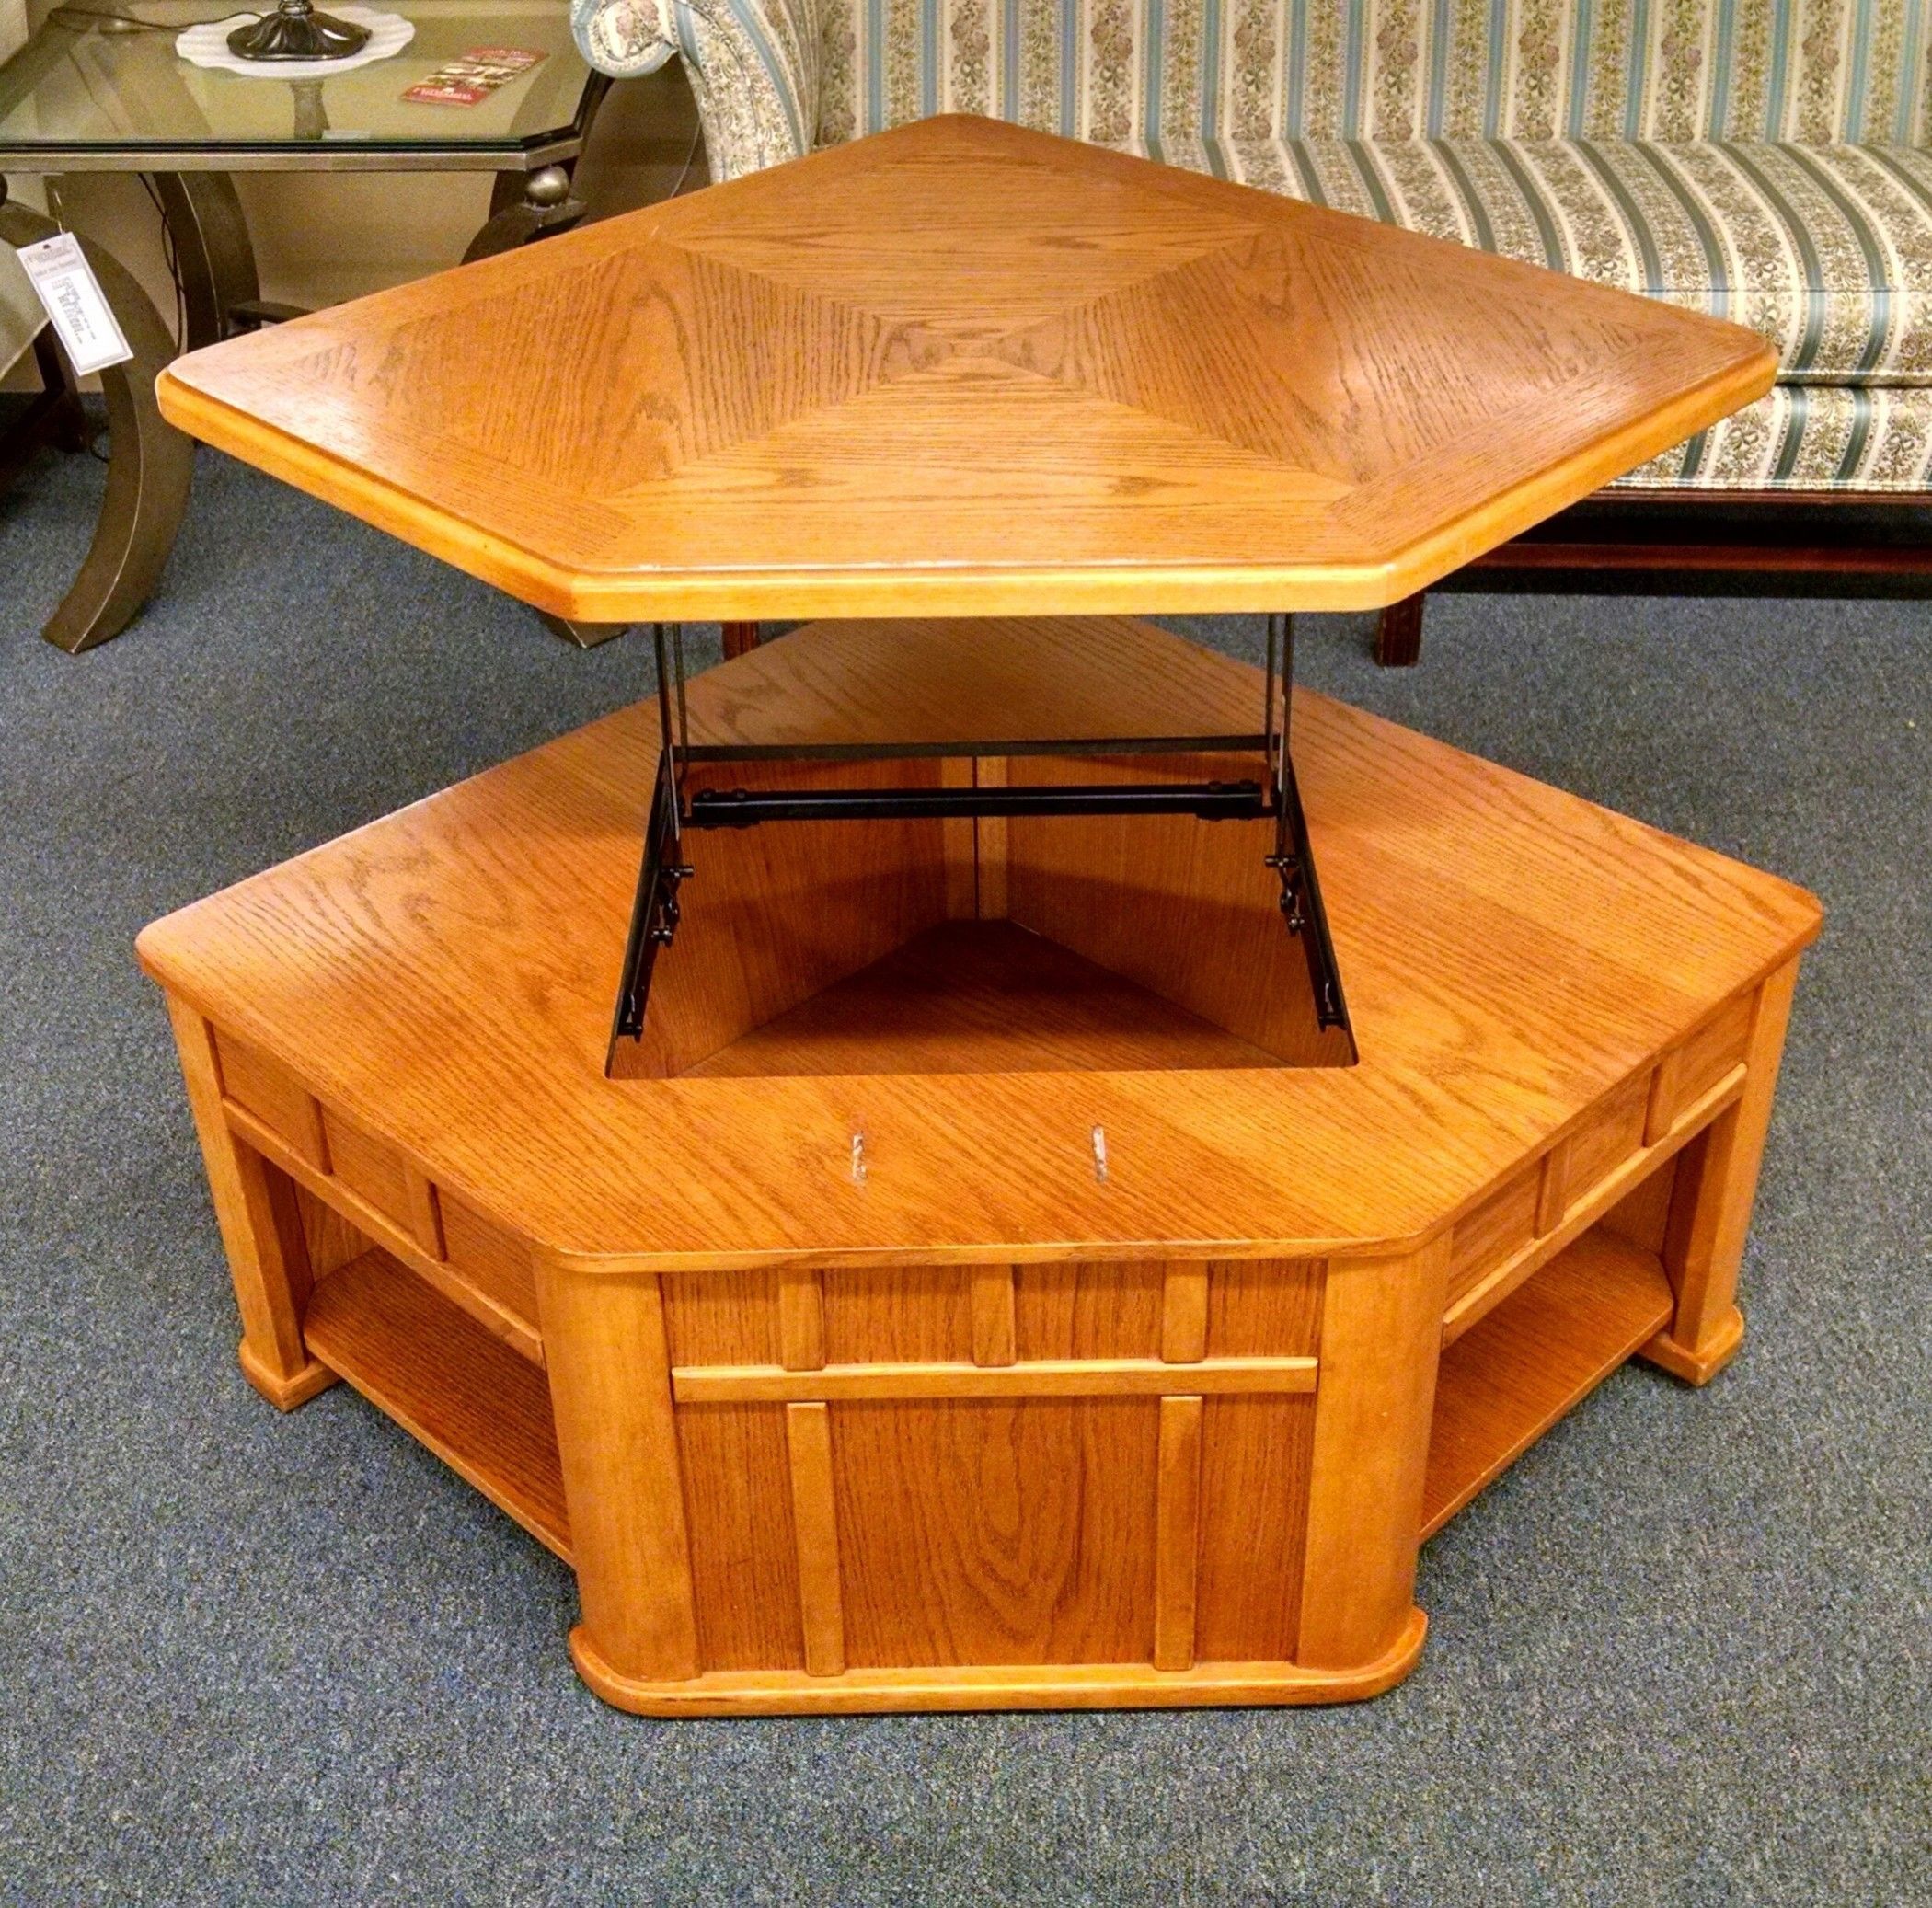 Oak Lift Top Coffee Table | Delmarva Furniture Consignment Intended For Wood Lift Top Coffee Tables (View 2 of 20)